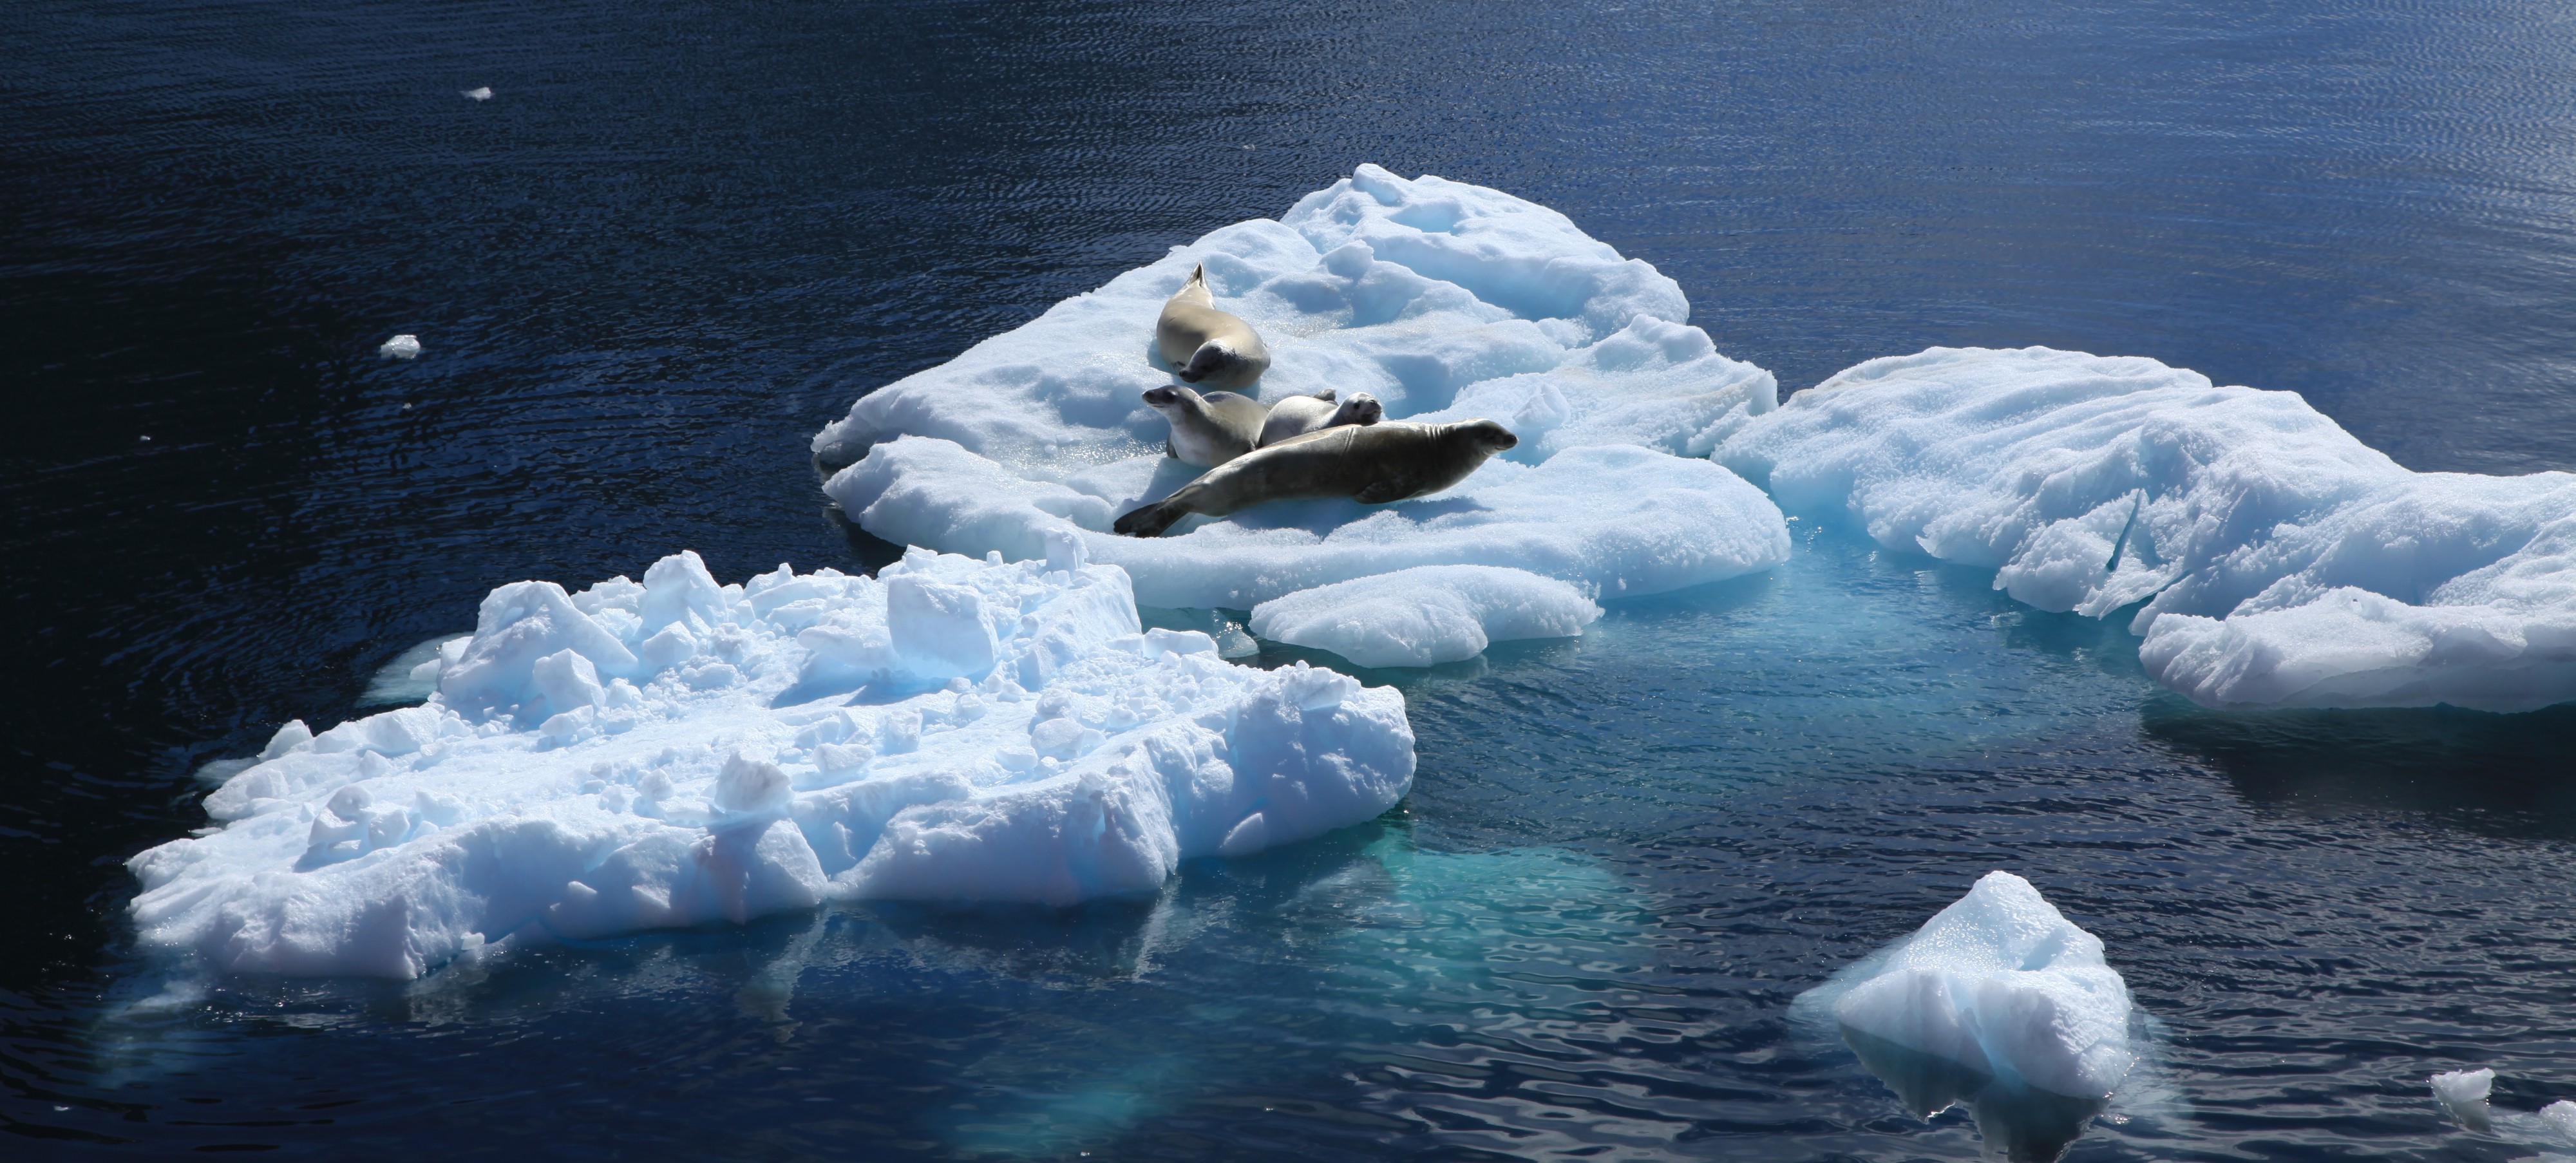 Crabeater Seals in the Lemaire Channel, Antarctica (6062829630)